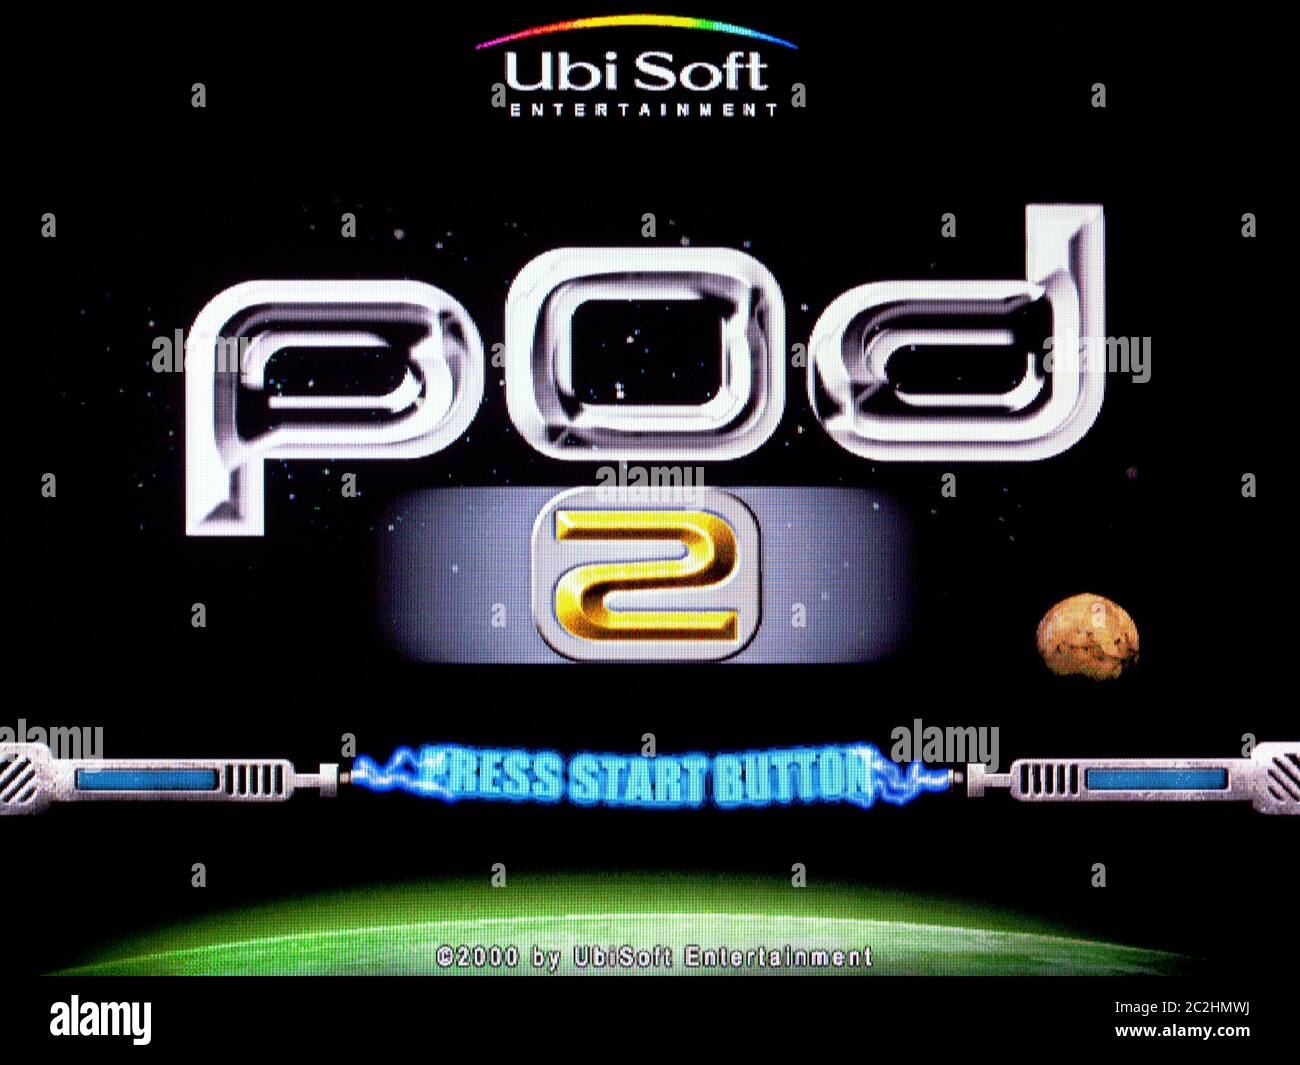 Pod 2 - Sega Dreamcast Videogame - Editorial use only Stock Photo